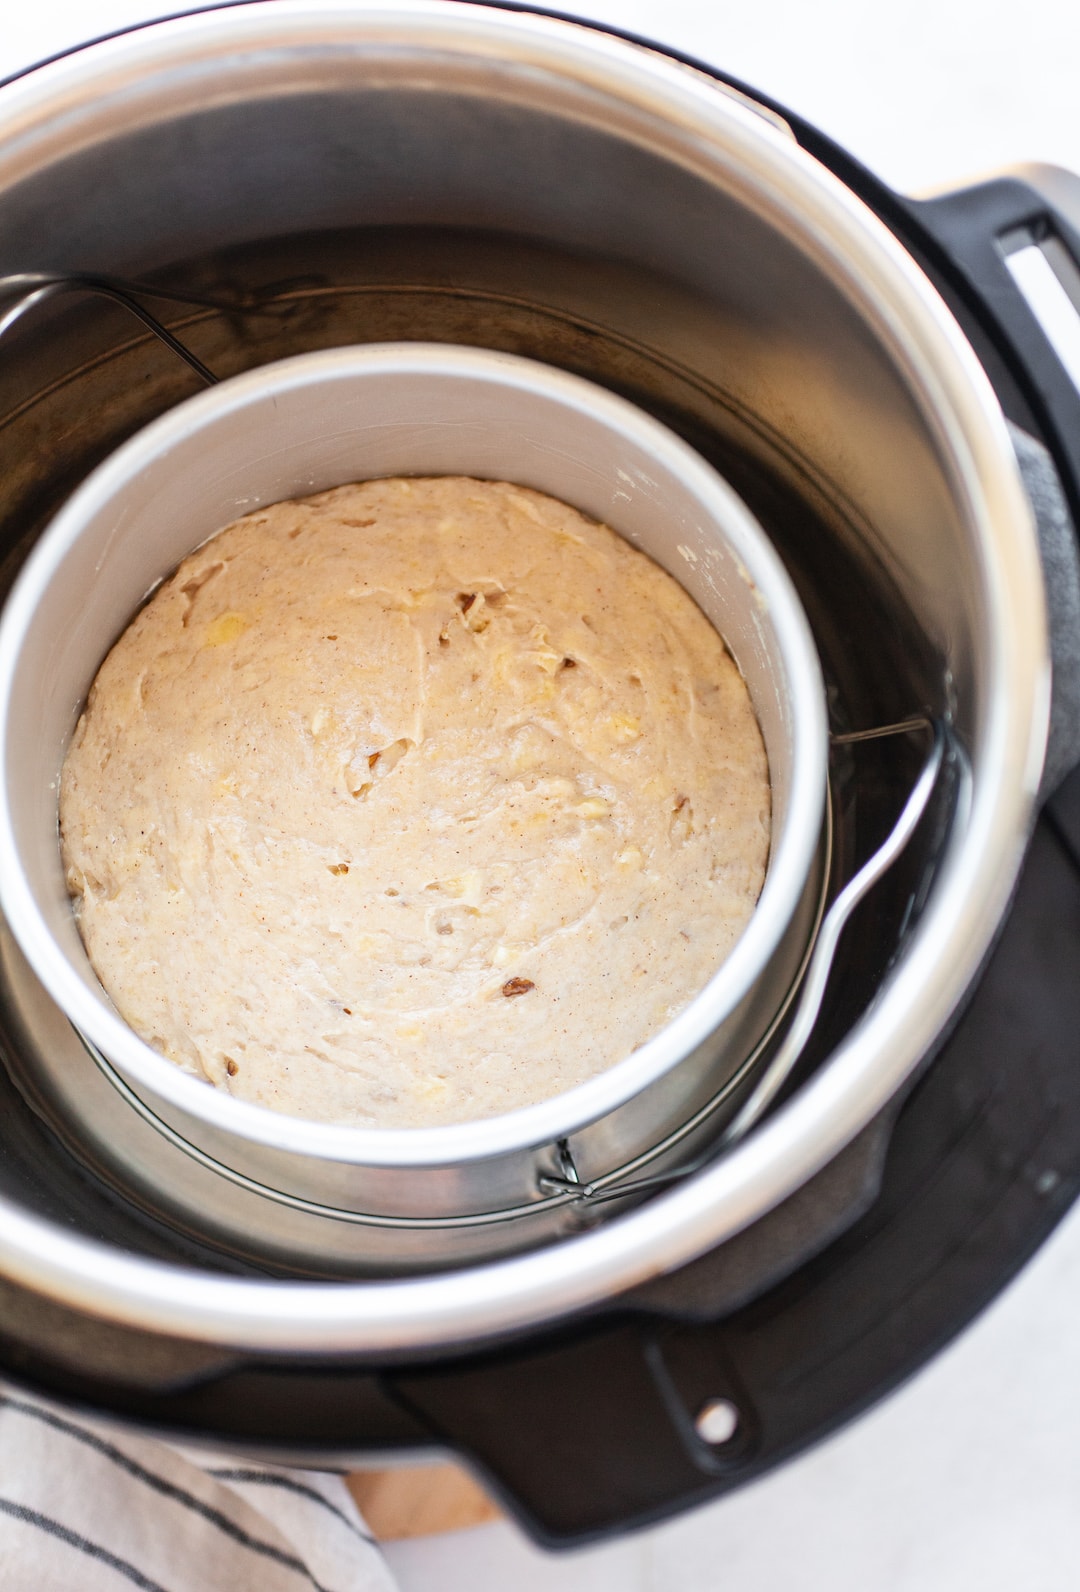 Cake pan sitting inside an instant pot filled with banana bread batter